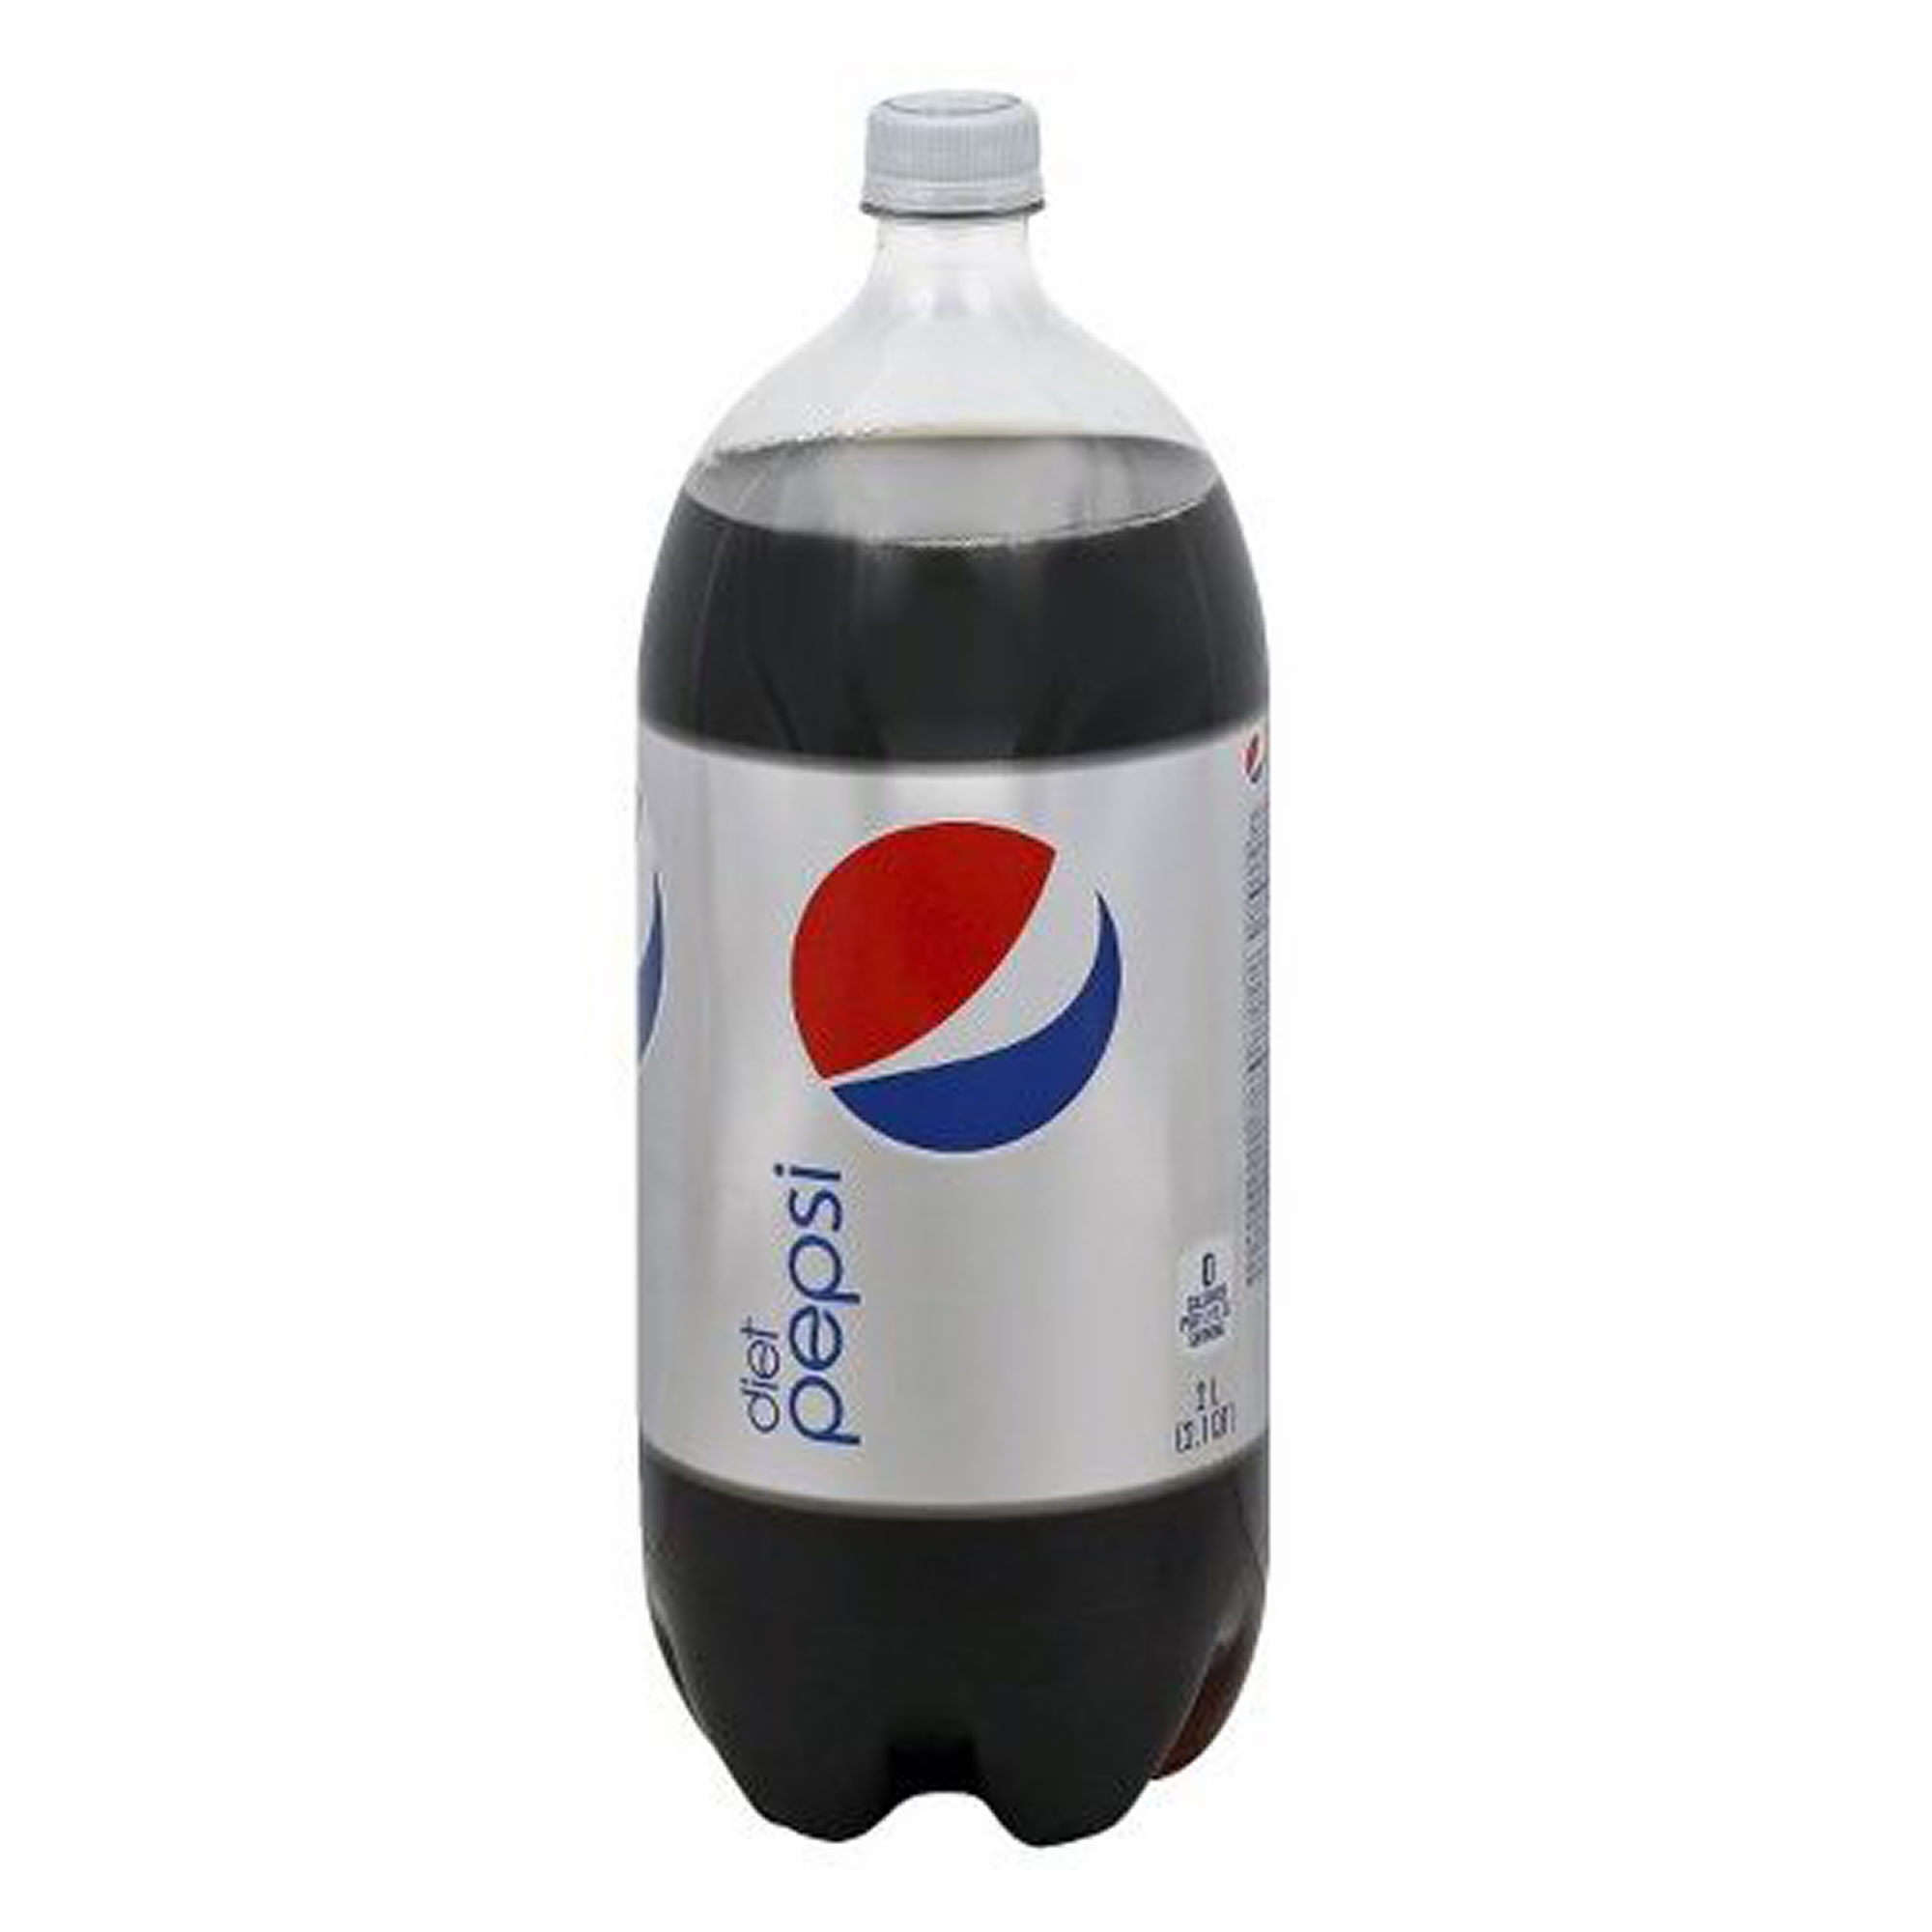 Then use one $0.75 off any three Pepsi-Cola products 2 Liter Bottles Printa...